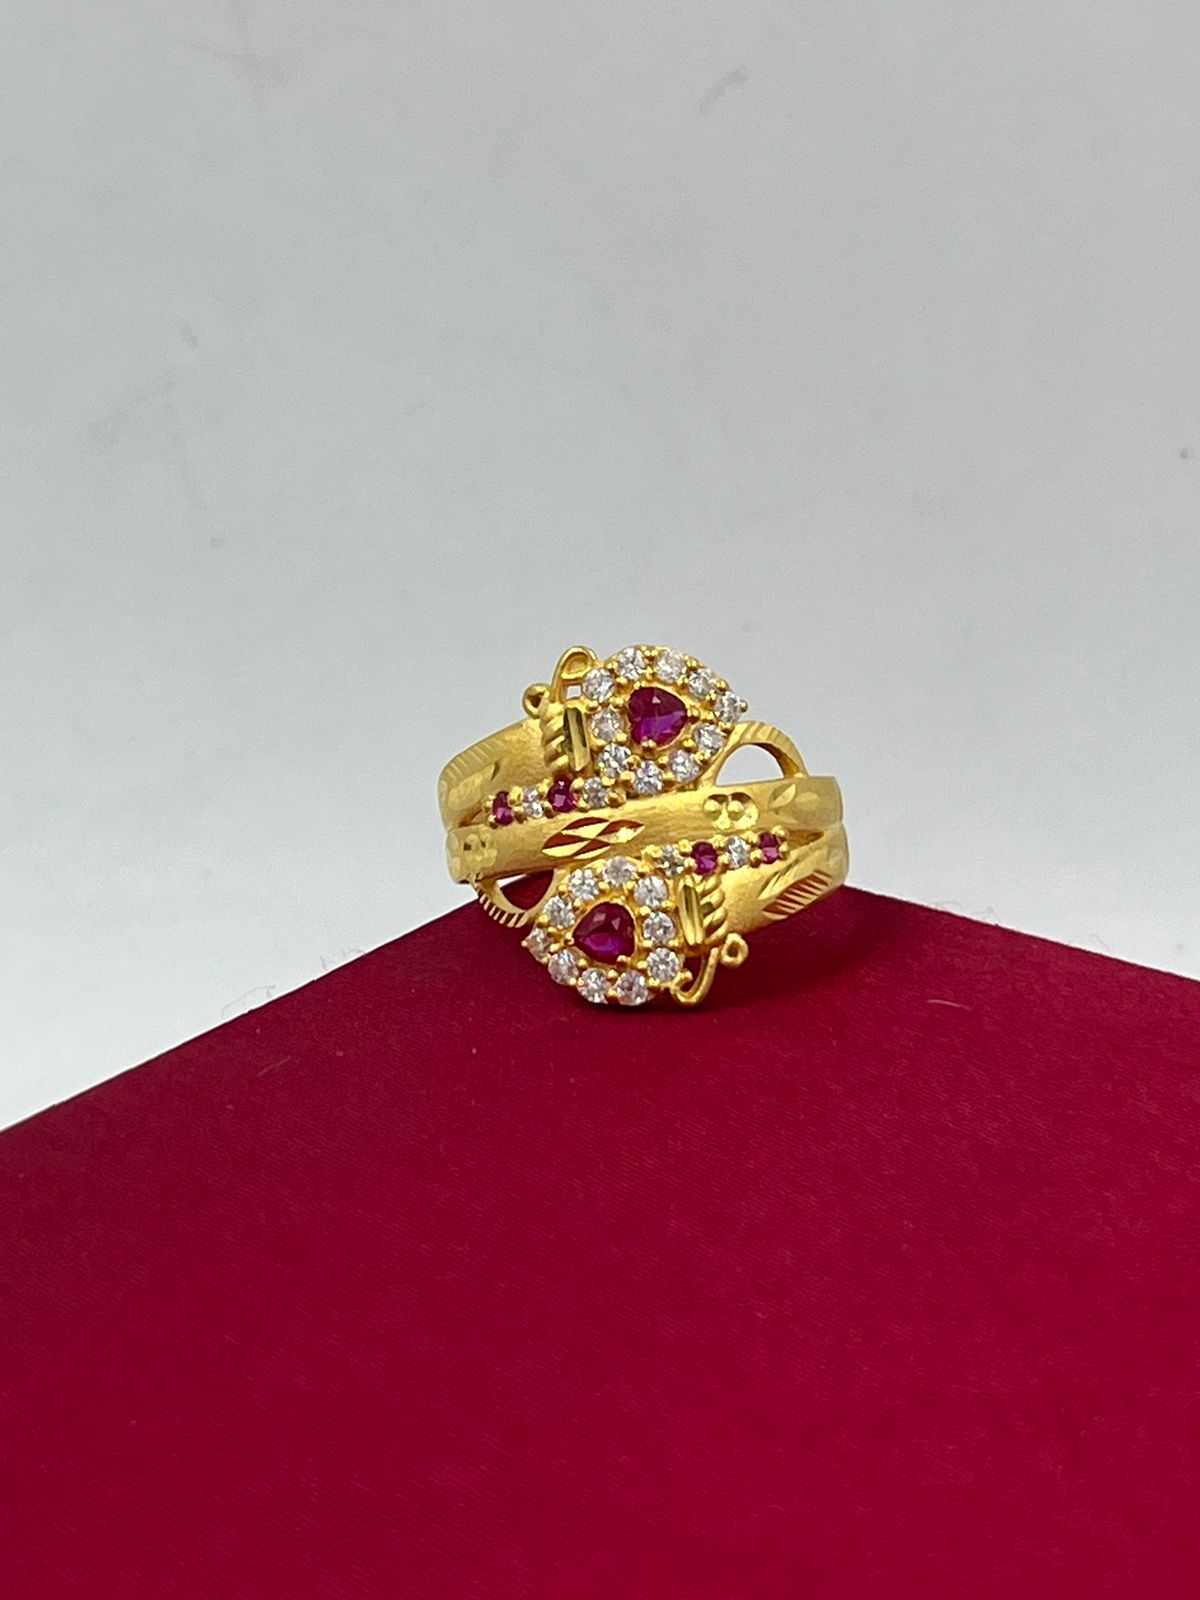 22K 5.2g Casting Ladies Gold Ring, 3.5g at Rs 21000 in New Delhi | ID:  2852504883197